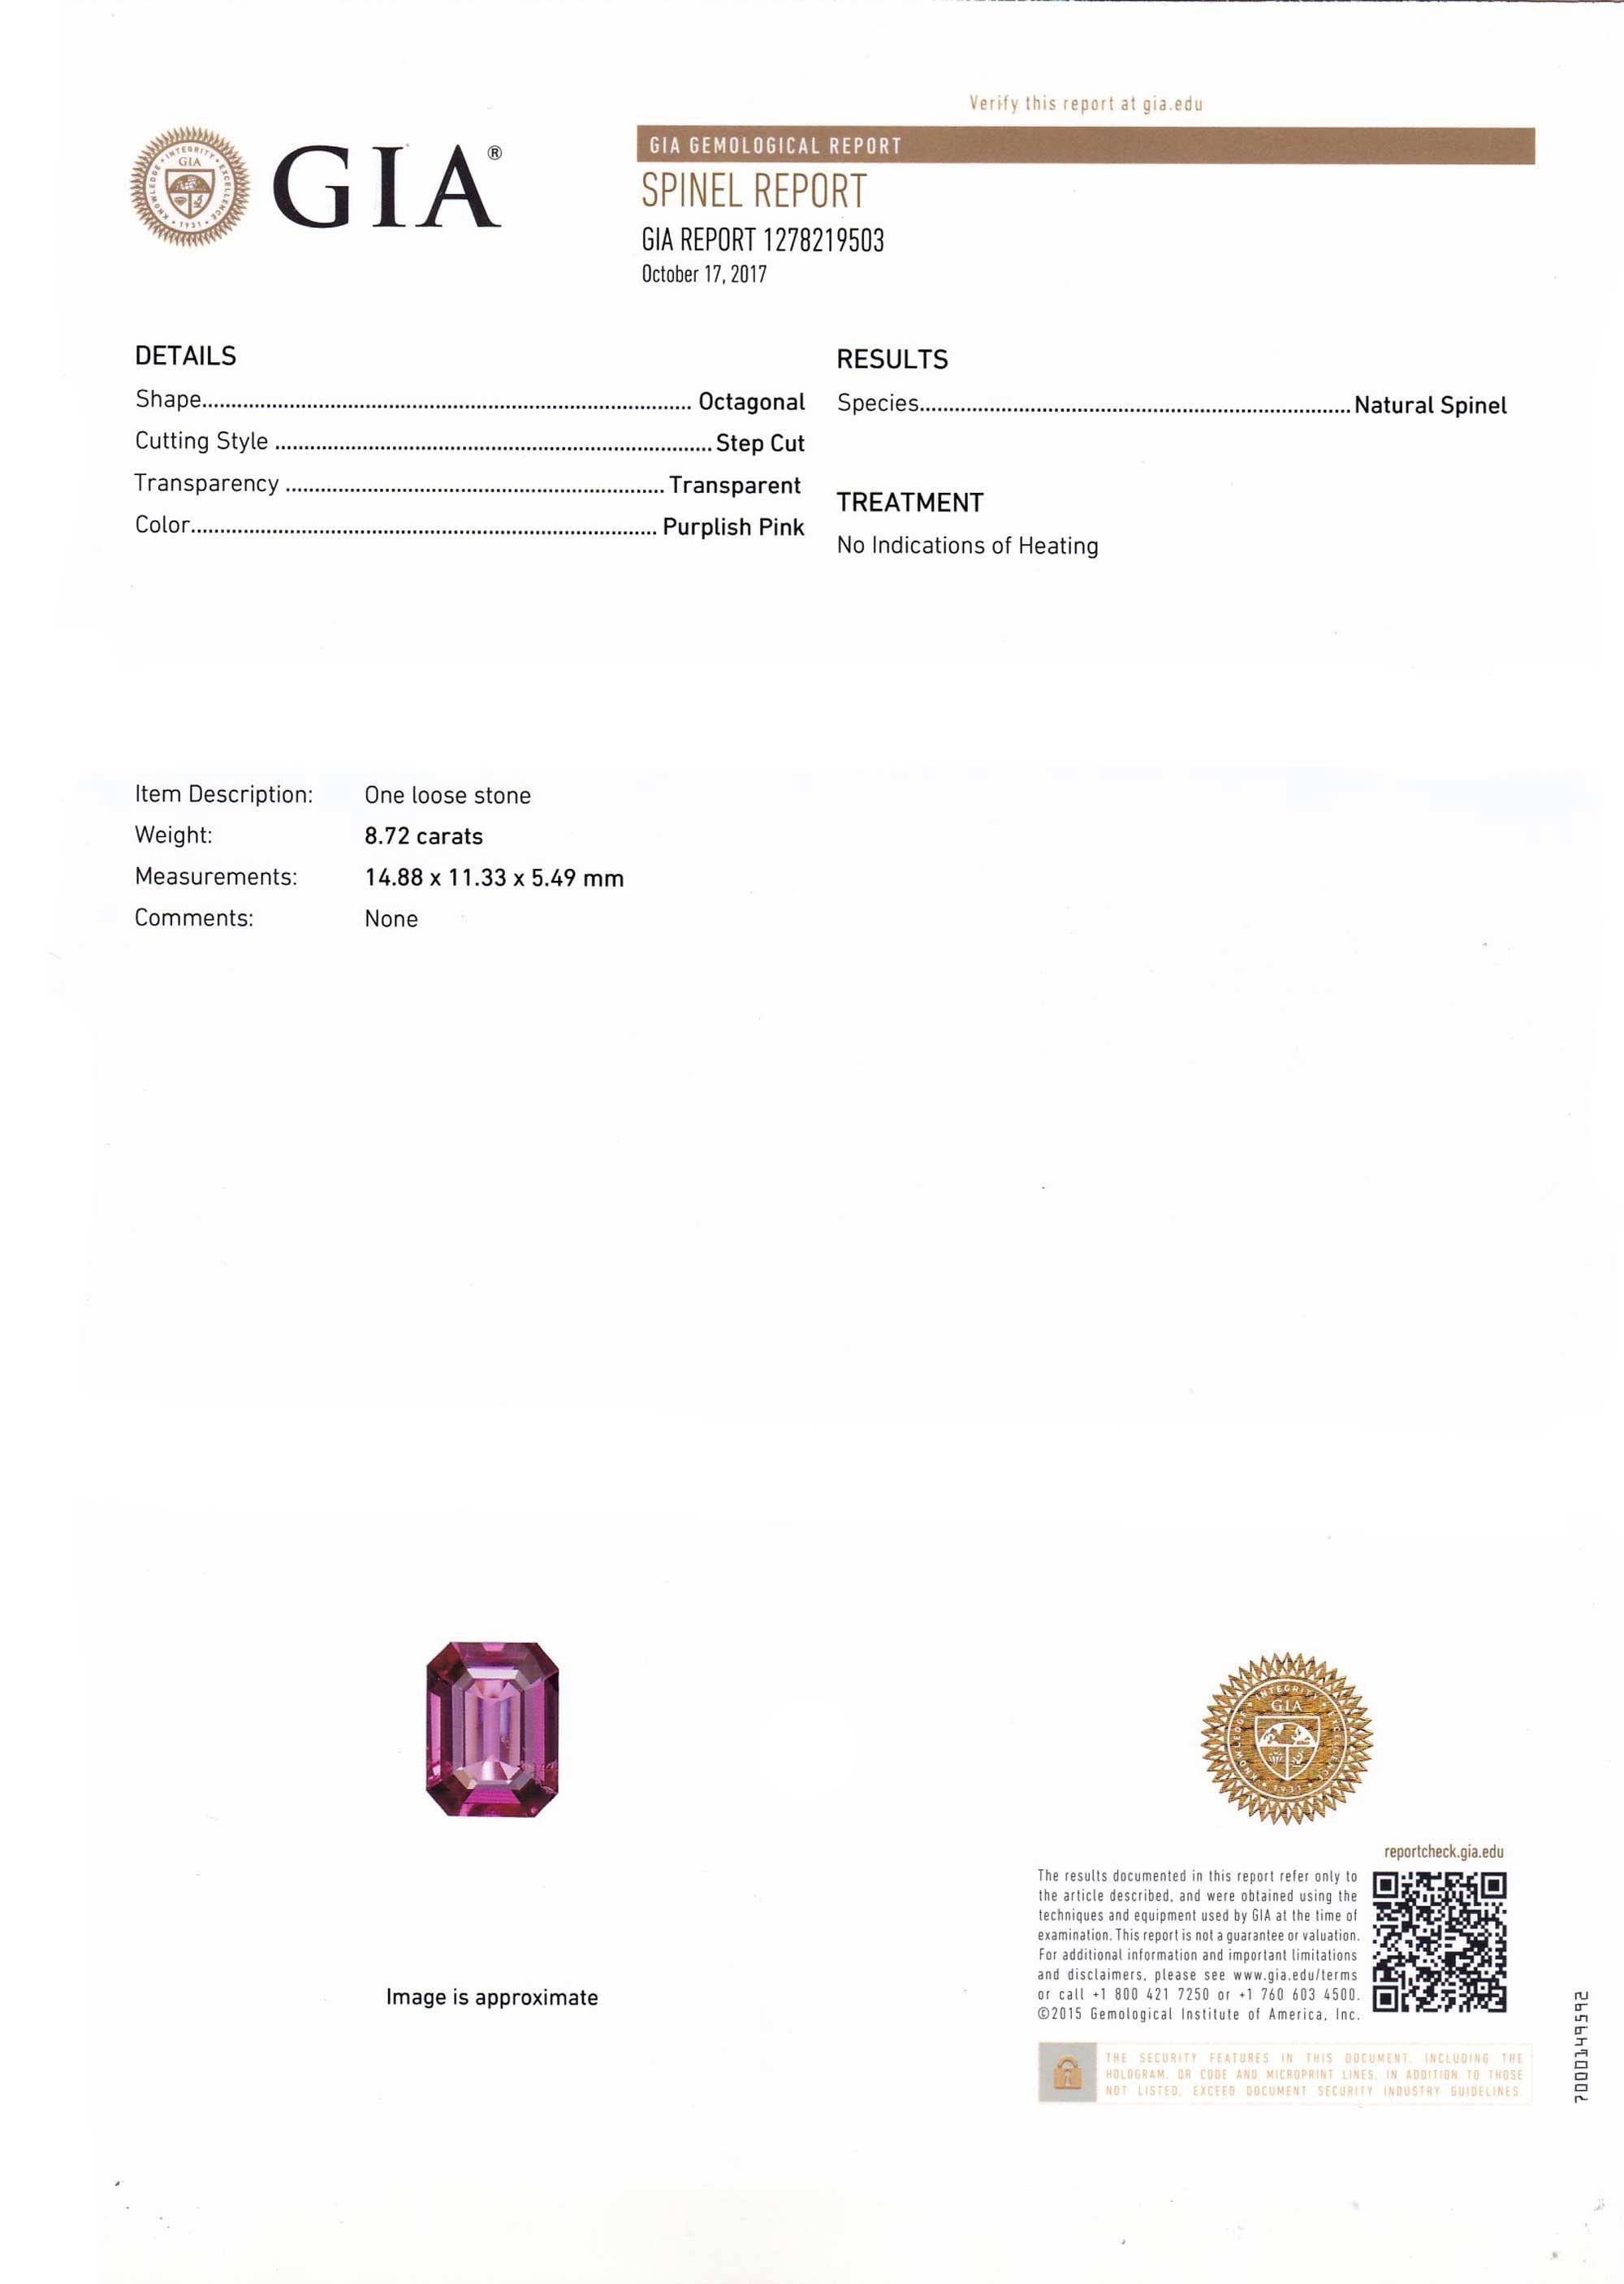 Emerald Cut GIA Certified 8.72 Carat Pink Spinel For Sale